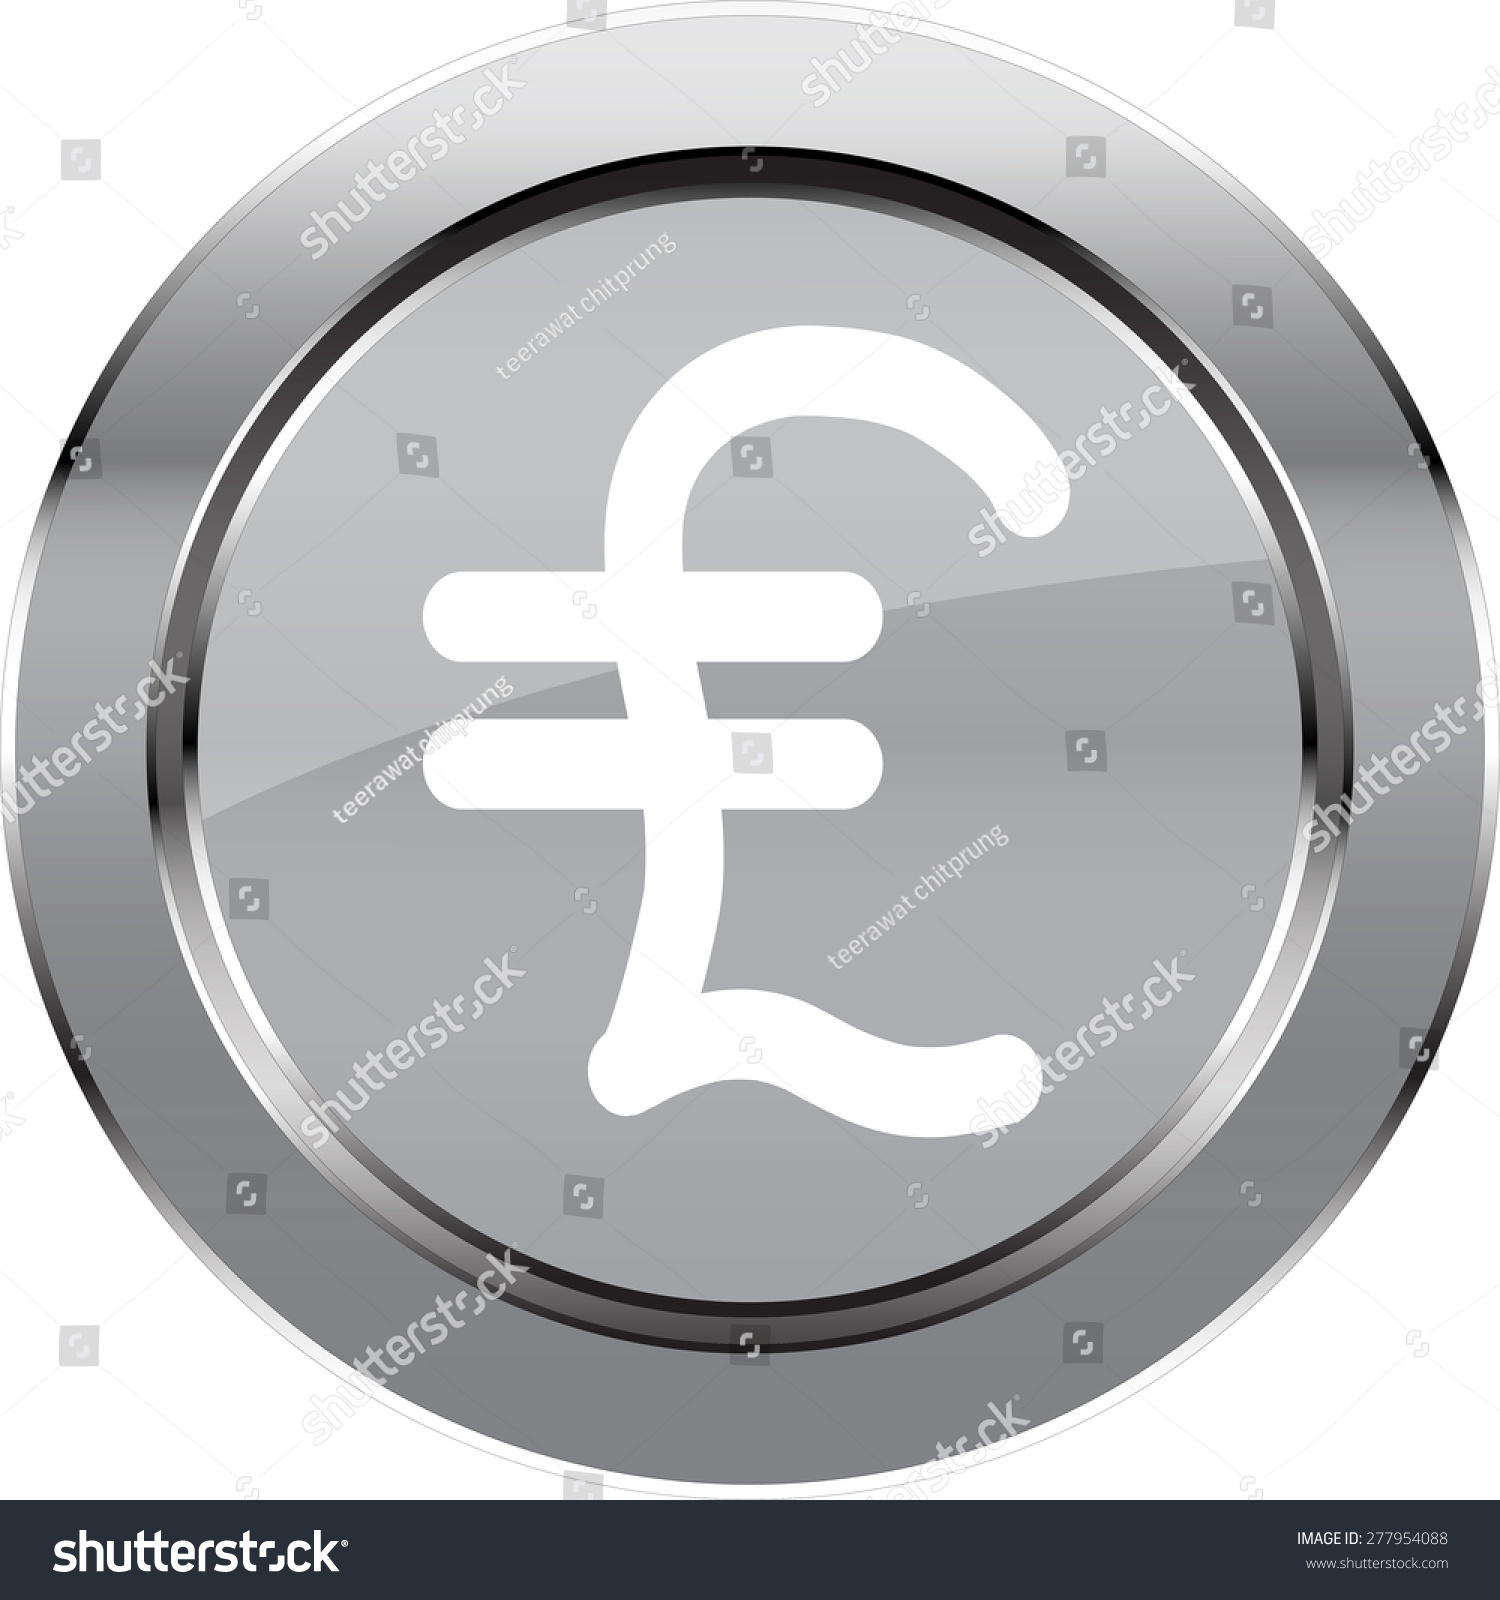 italy-currency-symbol-italy-national-currency-euro-symbol